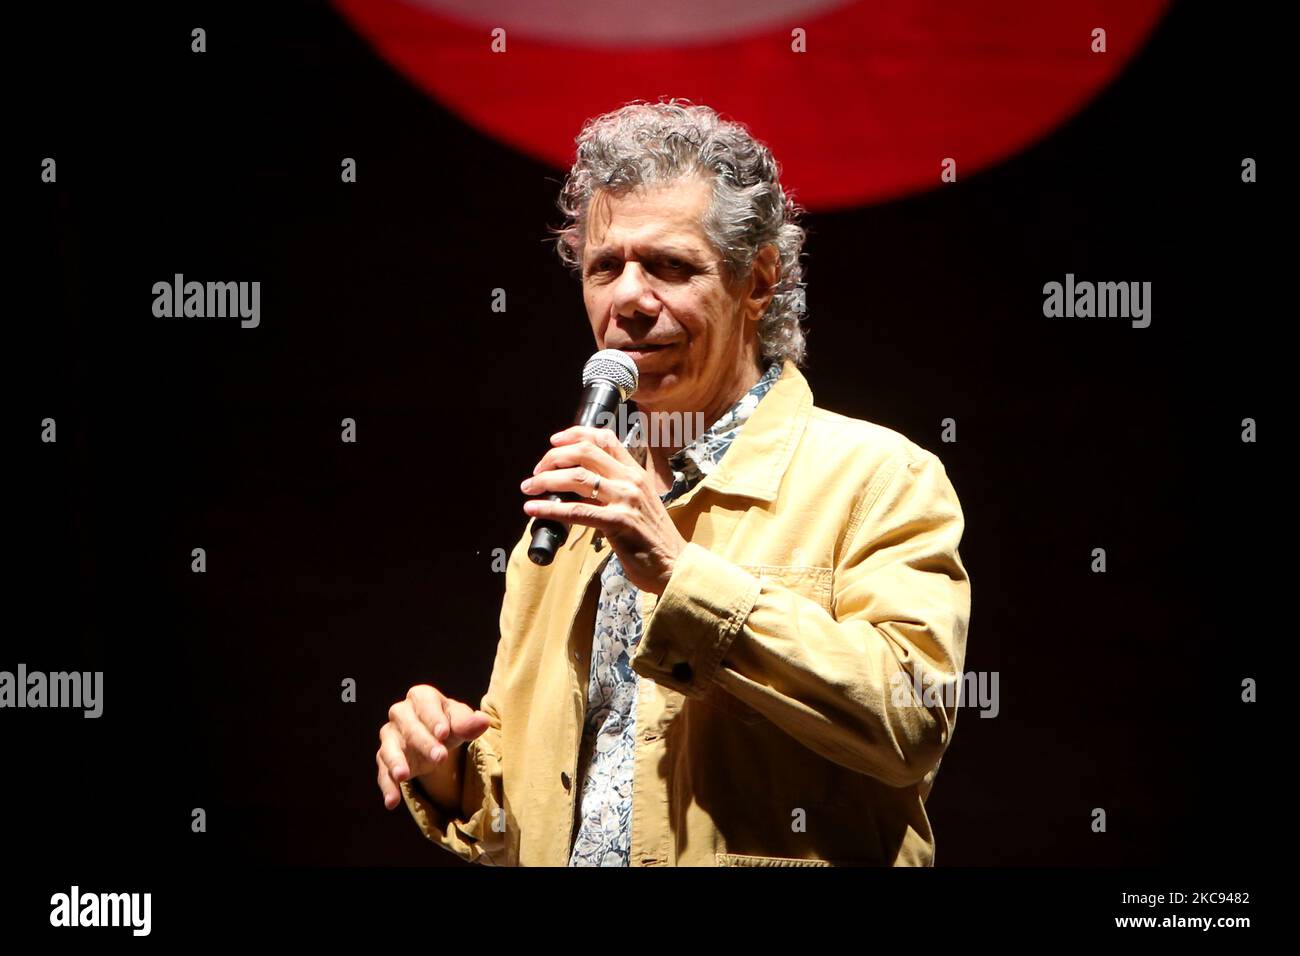 FILE IMAGE: US jazz pianist Chick Corea performs at the EDP Cool Jazz Festival in Oeiras, Portugal on July 19, 2015. Corea, a towering jazz pianist with a staggering 23 Grammy awards who pushed the boundaries of the genre and worked alongside Miles Davis and Herbie Hancock, has died. He was 79. Corea died Tuesday, Feb. 9, 2021, of a rare form of cancer, his team posted on his web site. His death was confirmed by Corea's web and marketing manager, Dan Muse. (Photo by Pedro FiÃºza/NurPhoto) Stock Photo